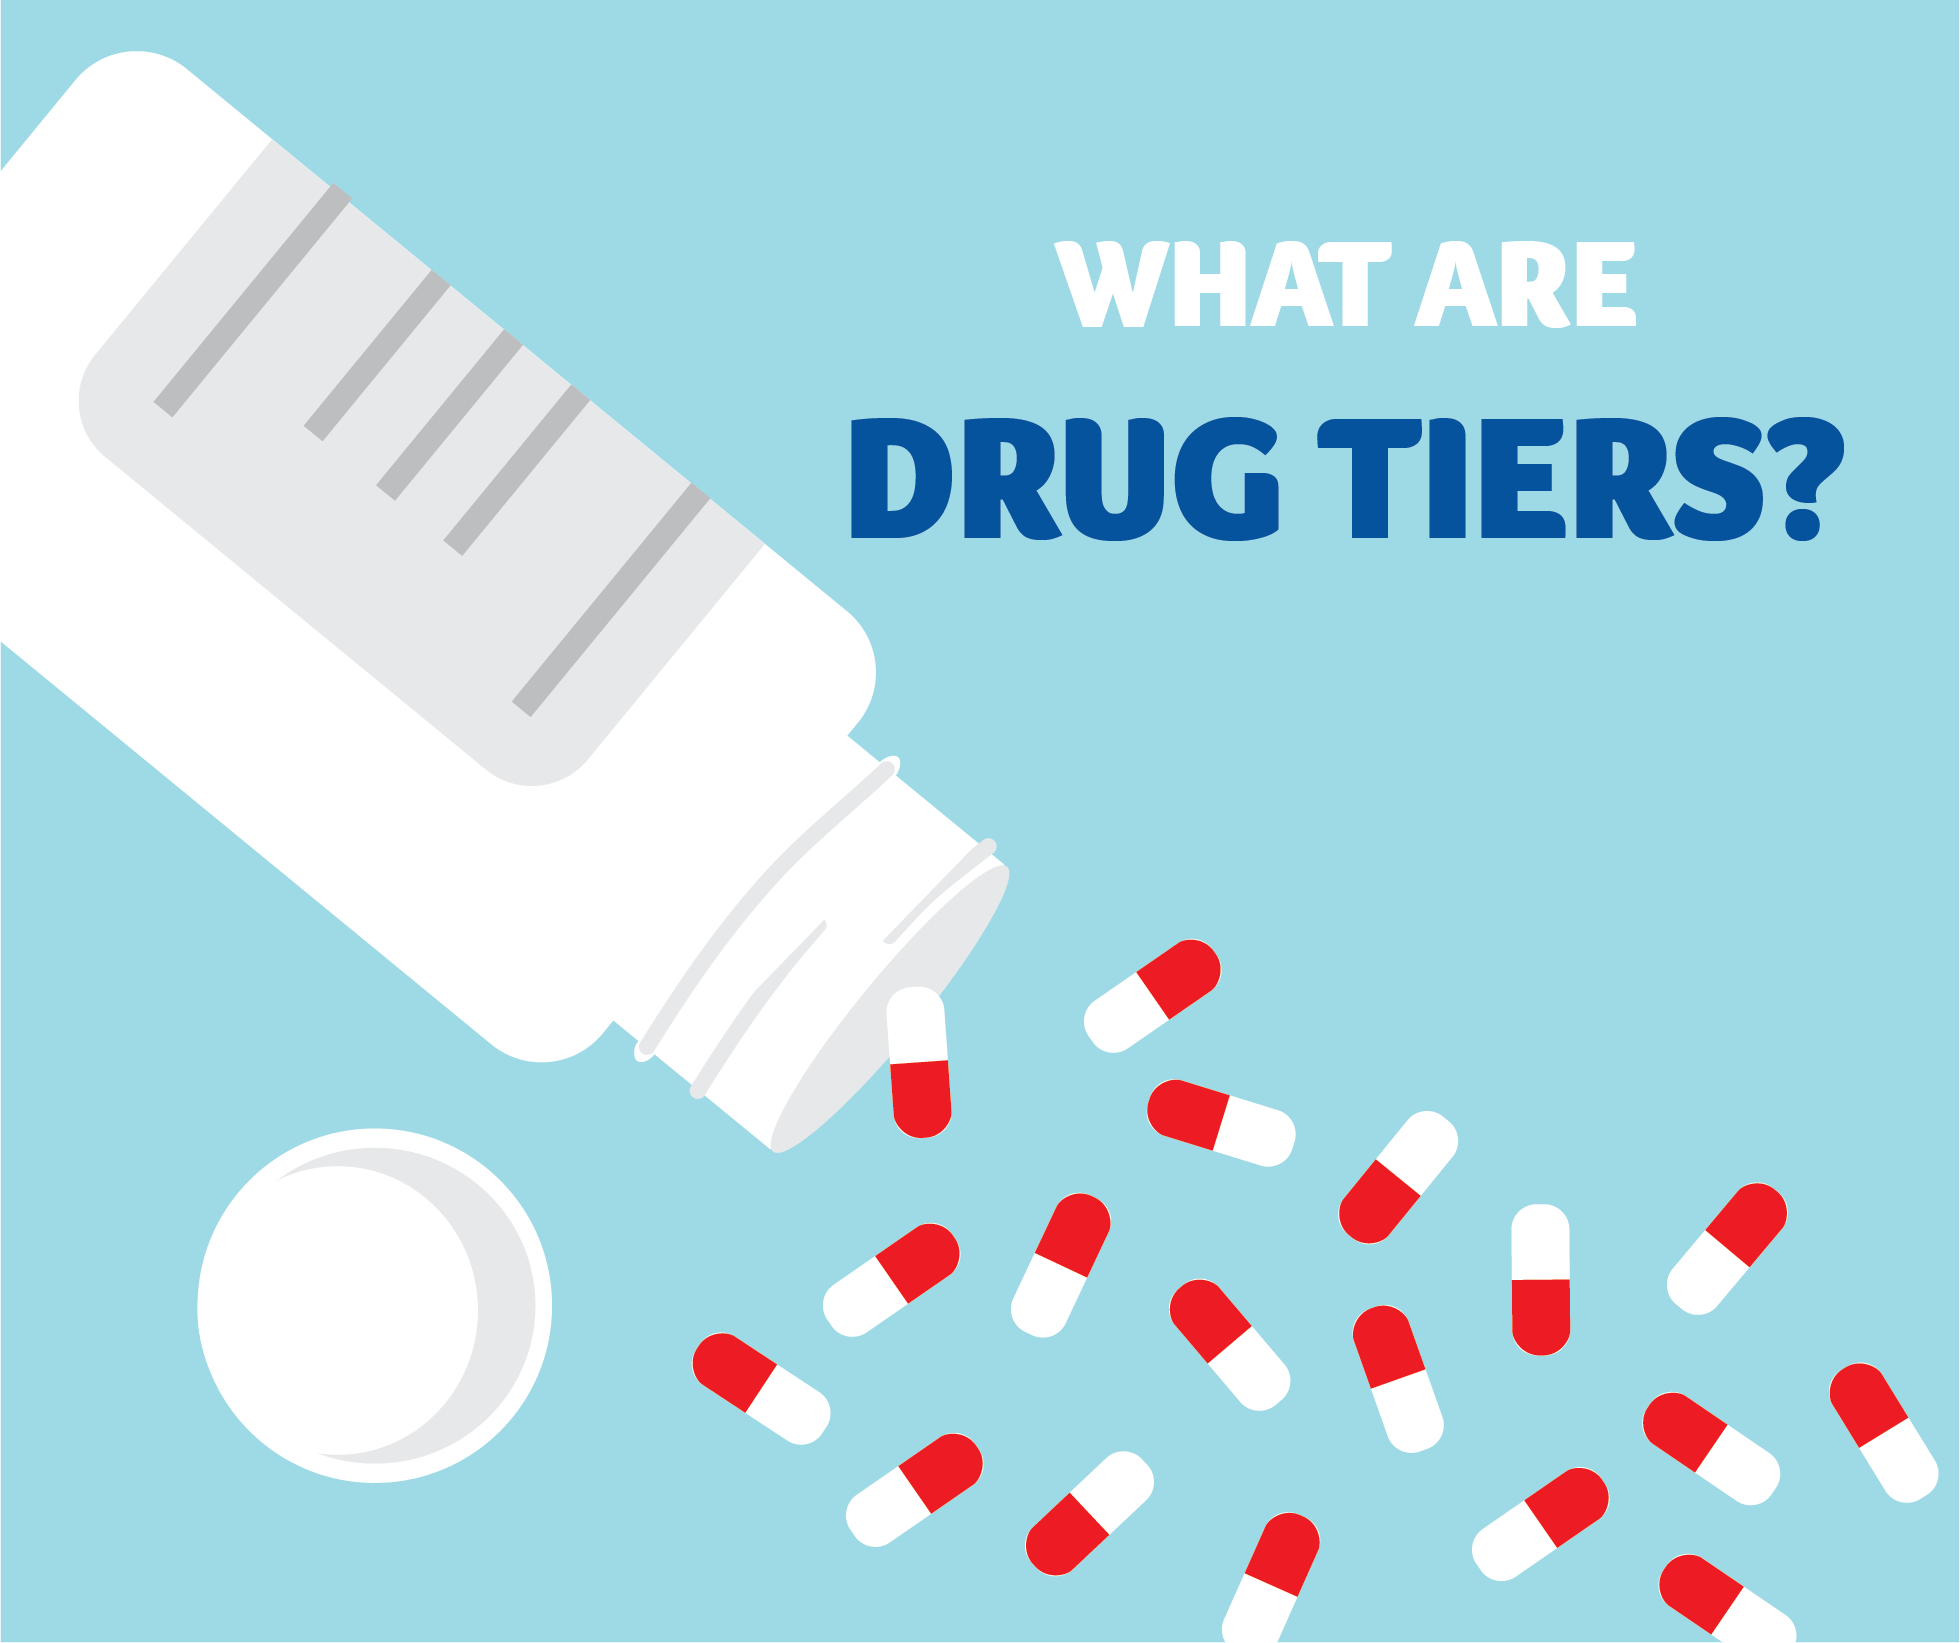 What are Drug Tiers?